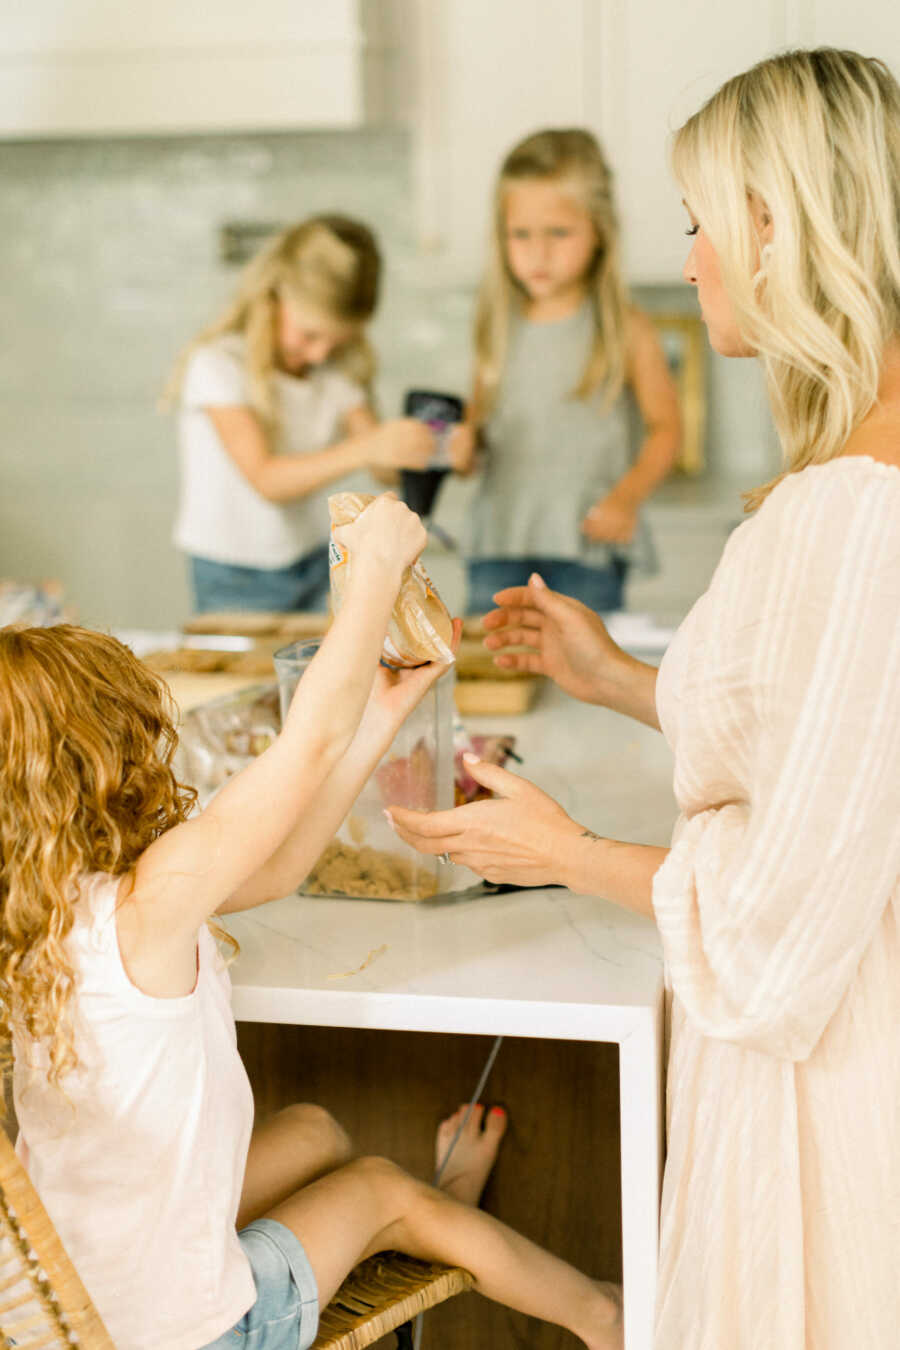 Little girl passes loaf of bread to her mom as they make sandwiches together